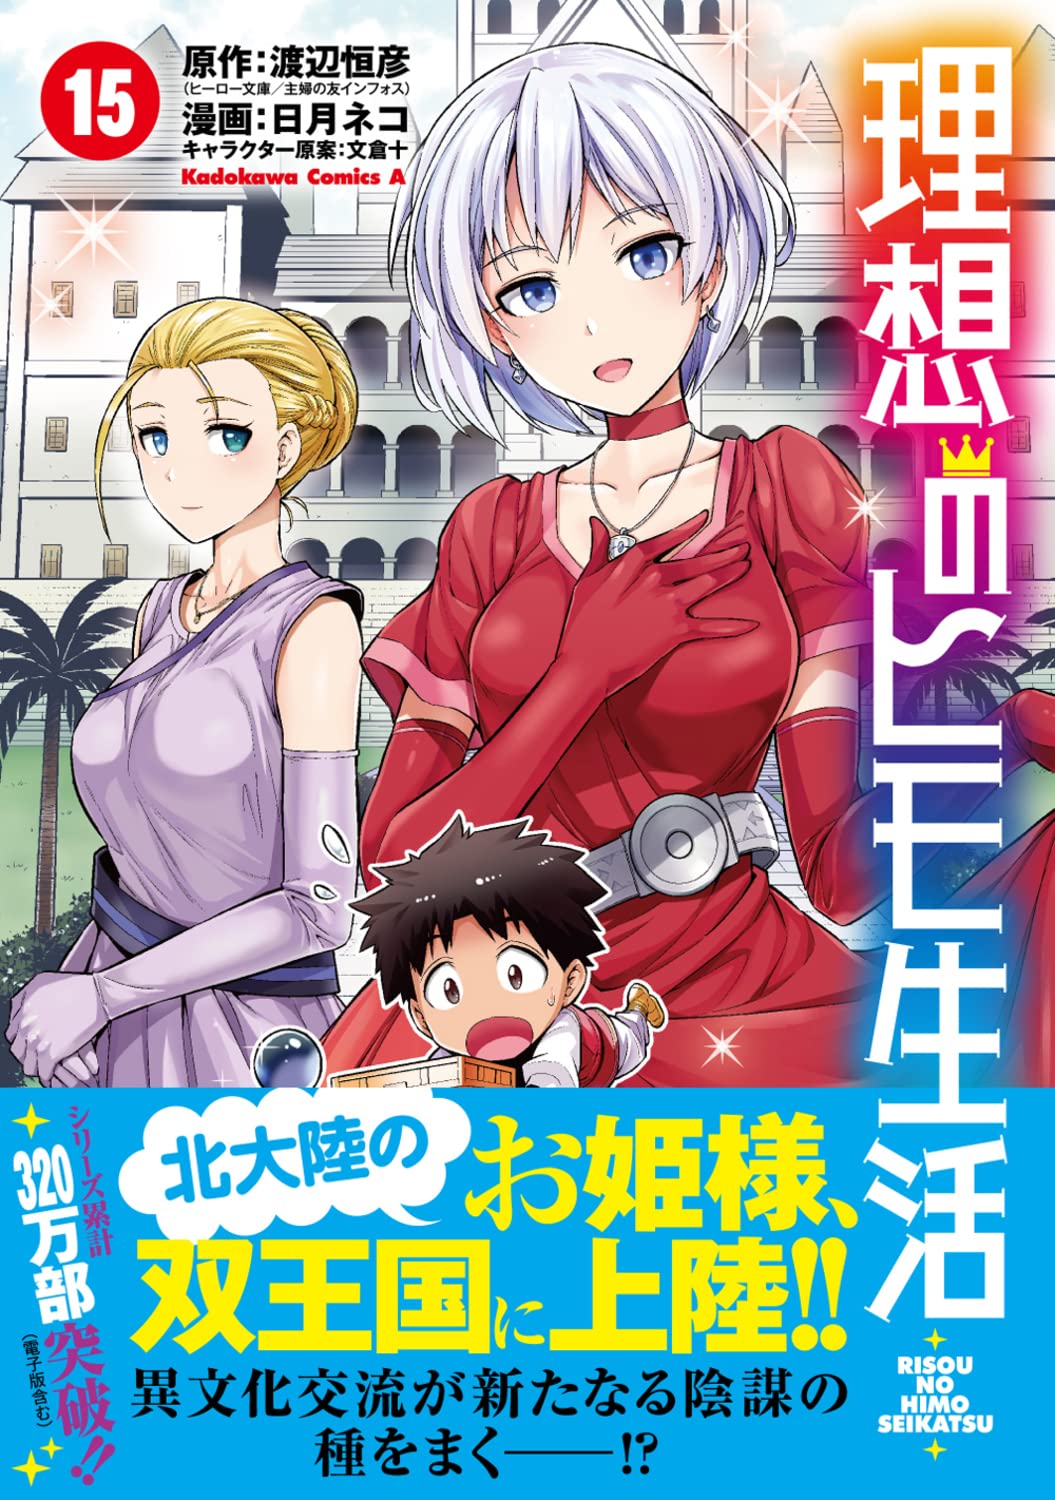 Manga Volume 3, In Another World With My Smartphone Wiki